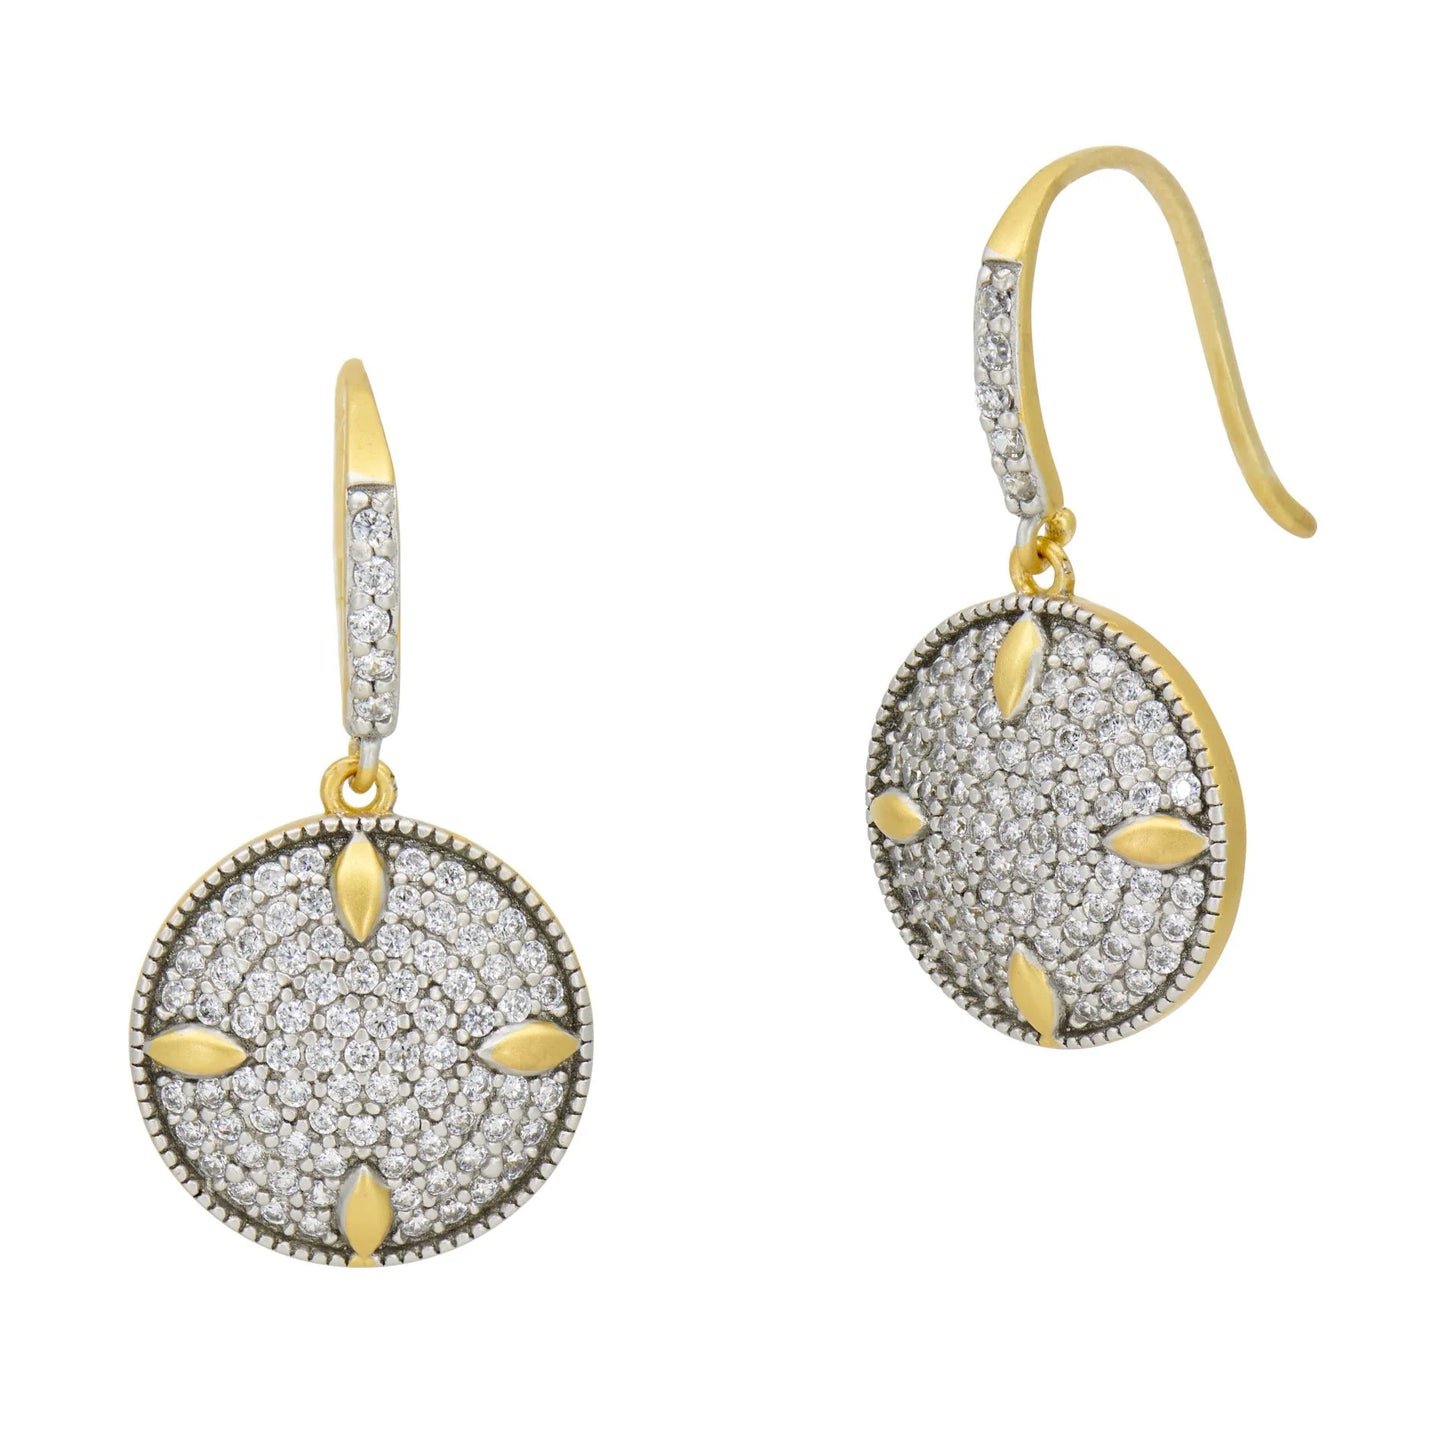 PETALS AND PAVE DISC EARRINGS